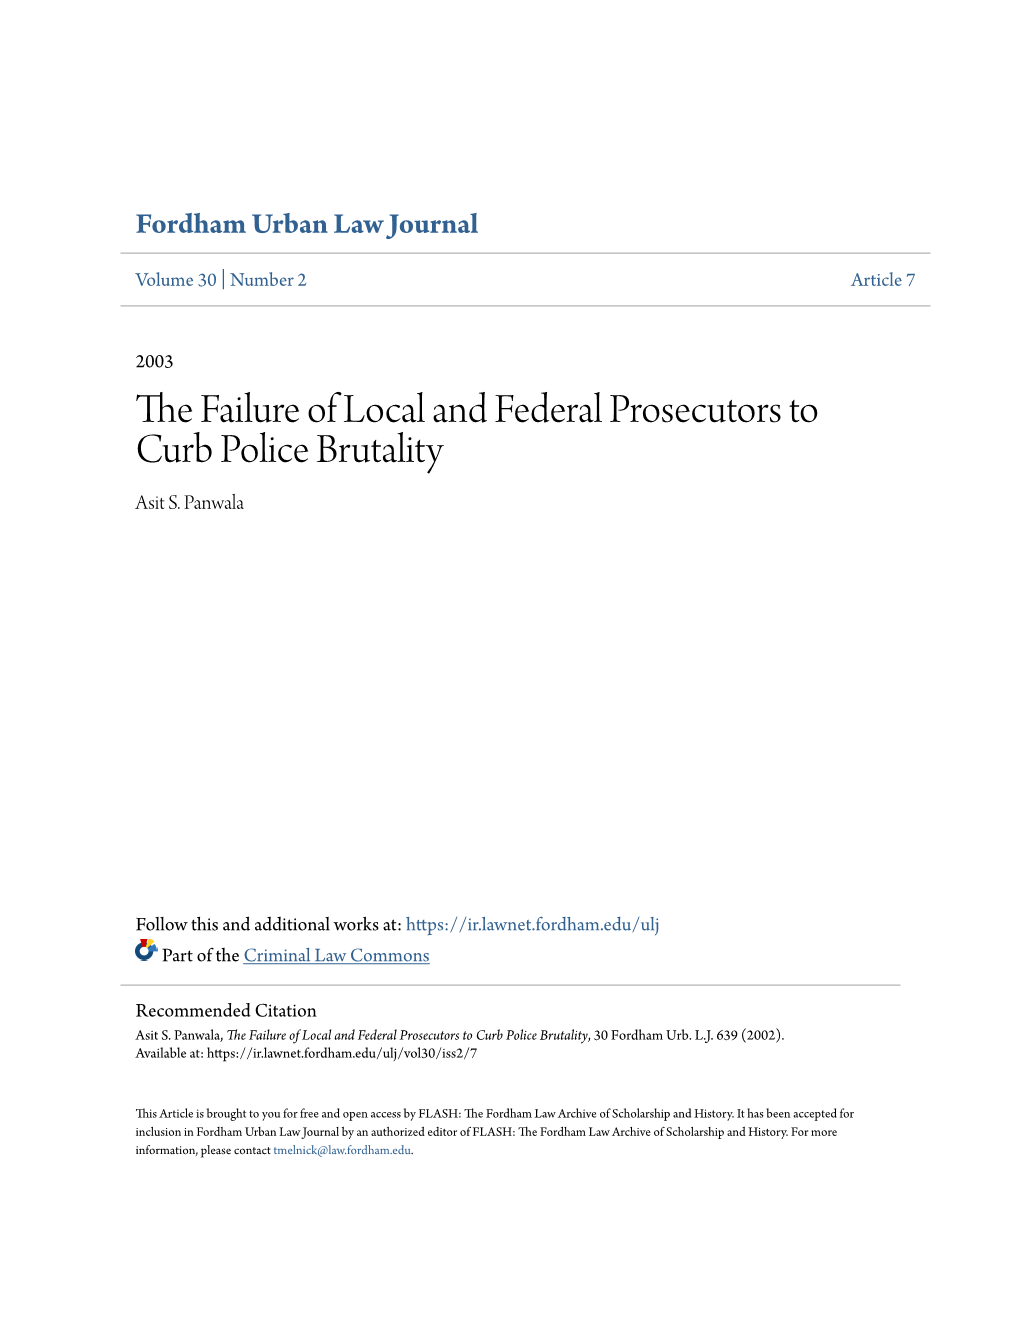 The Failure of Local and Federal Prosecutors to Curb Police Brutality, 30 Fordham Urb